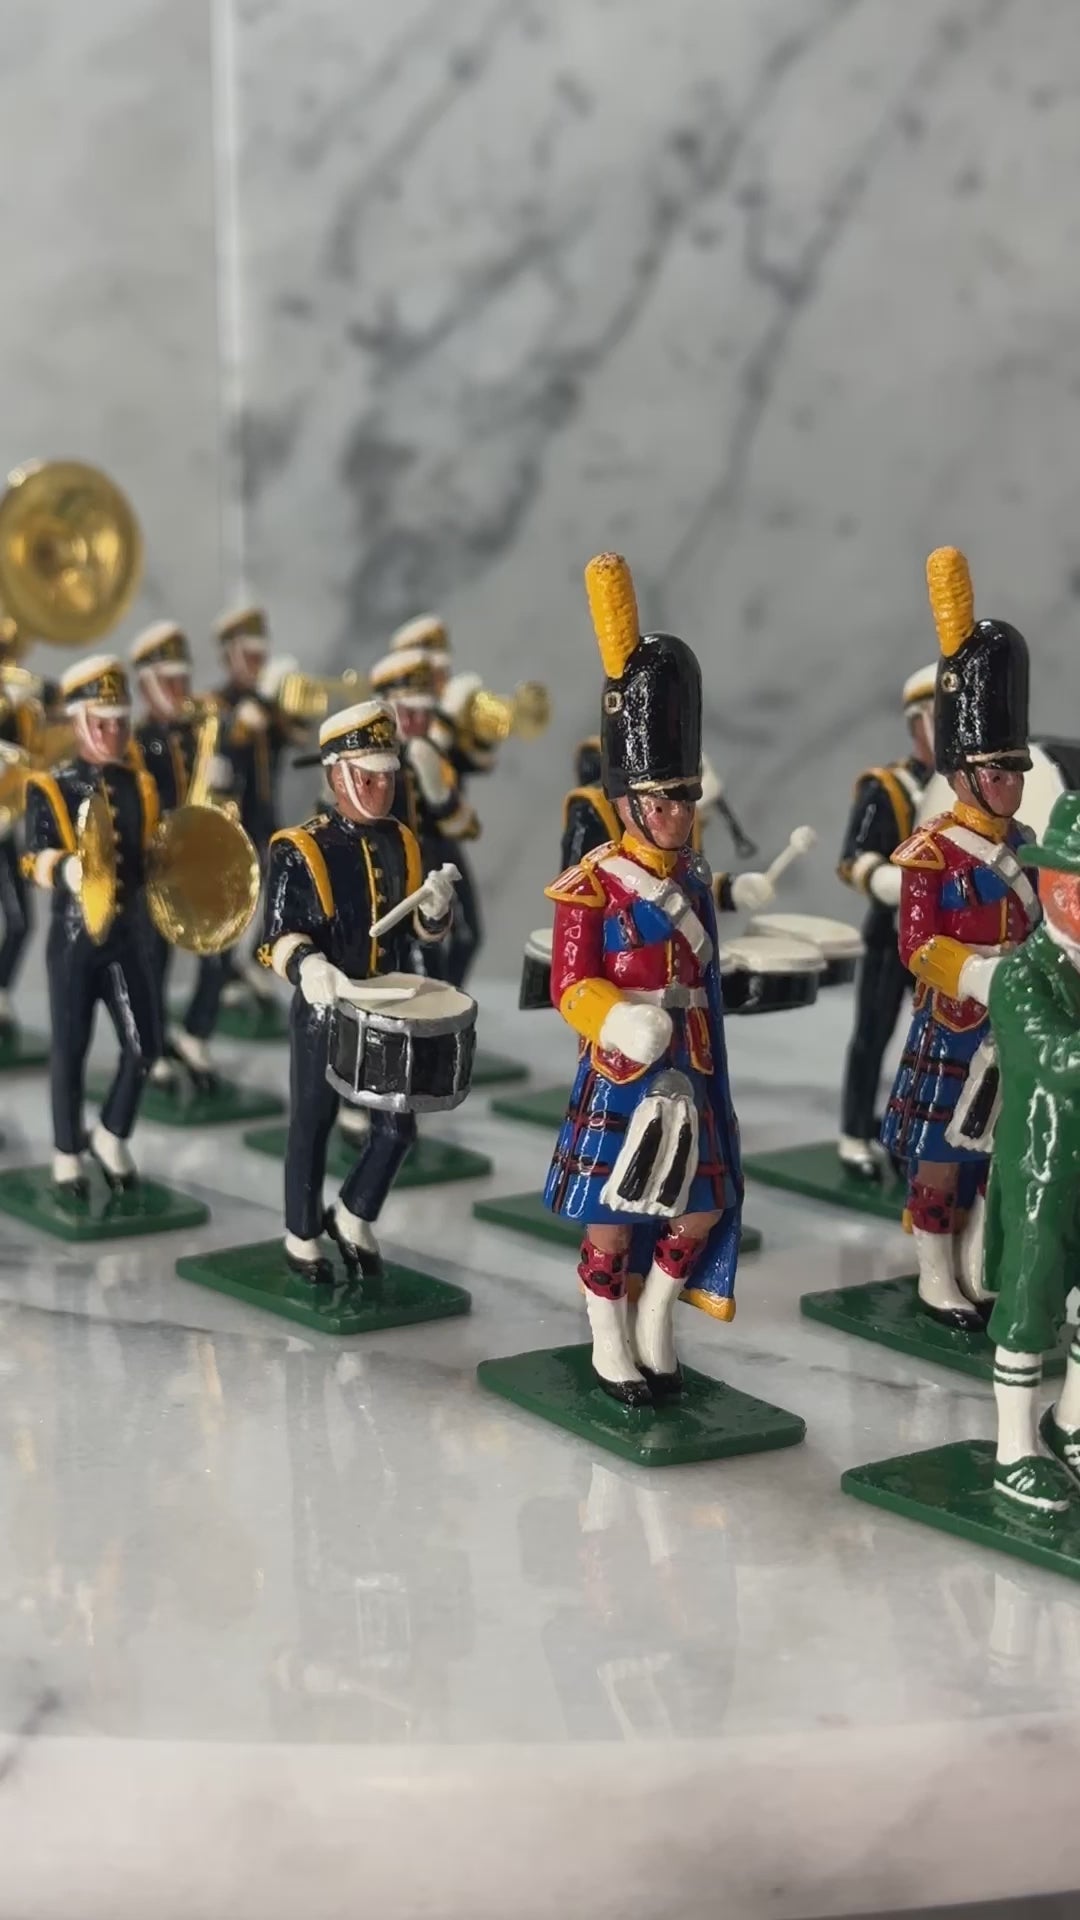 360 degree view of Collectible toy soldier miniature set Notre Dame Band of the Fighting Irish.